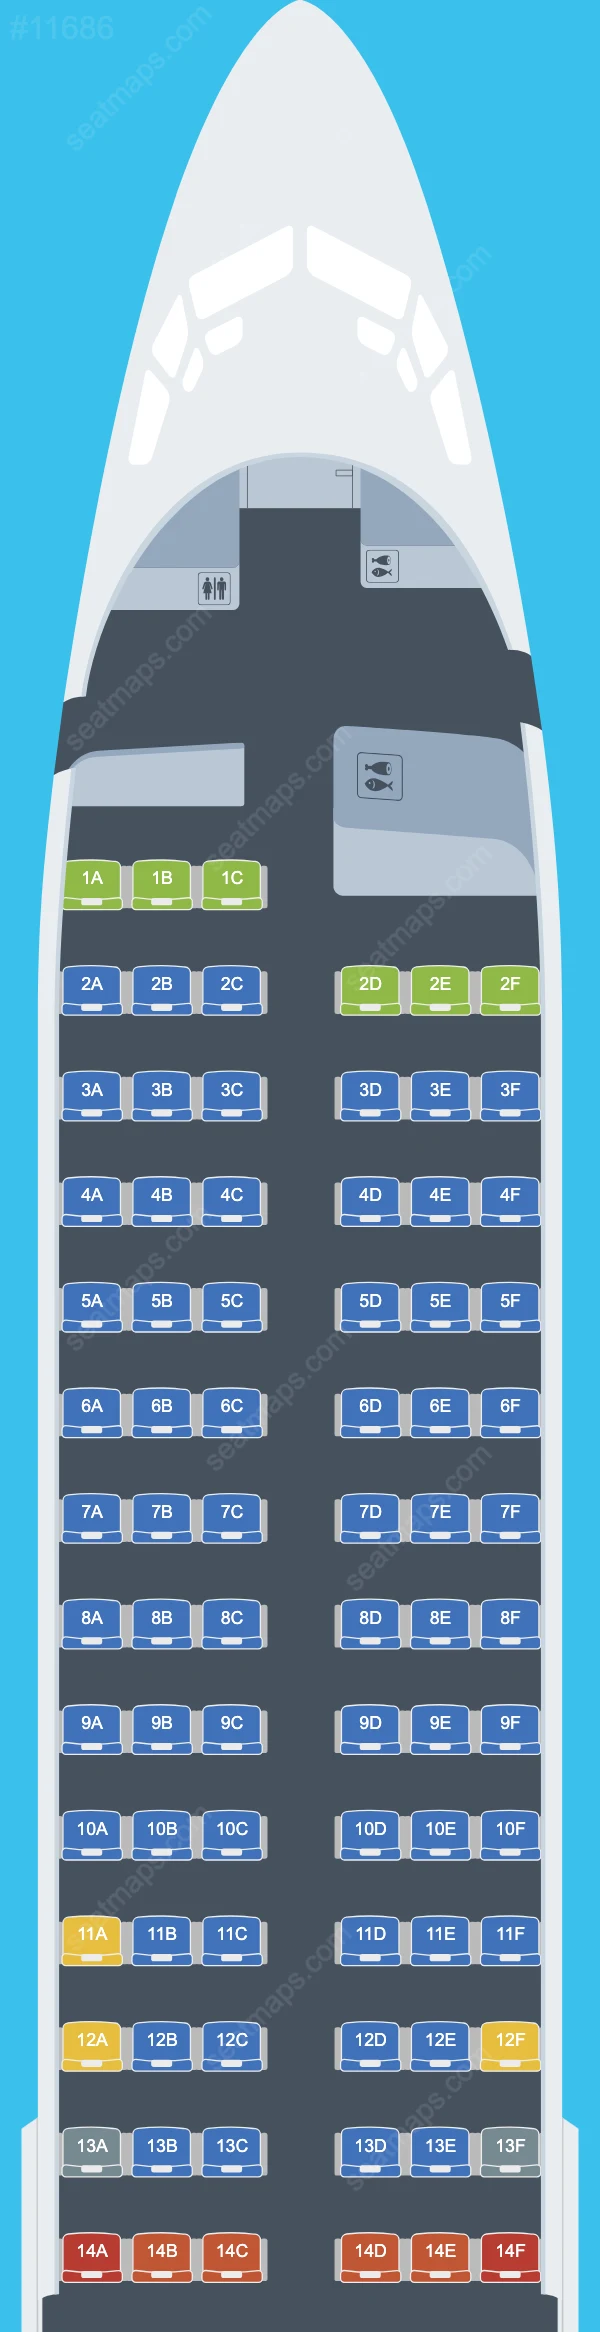 Eurowings Boeing 737-800 aircraft seat map  737-800 V.2